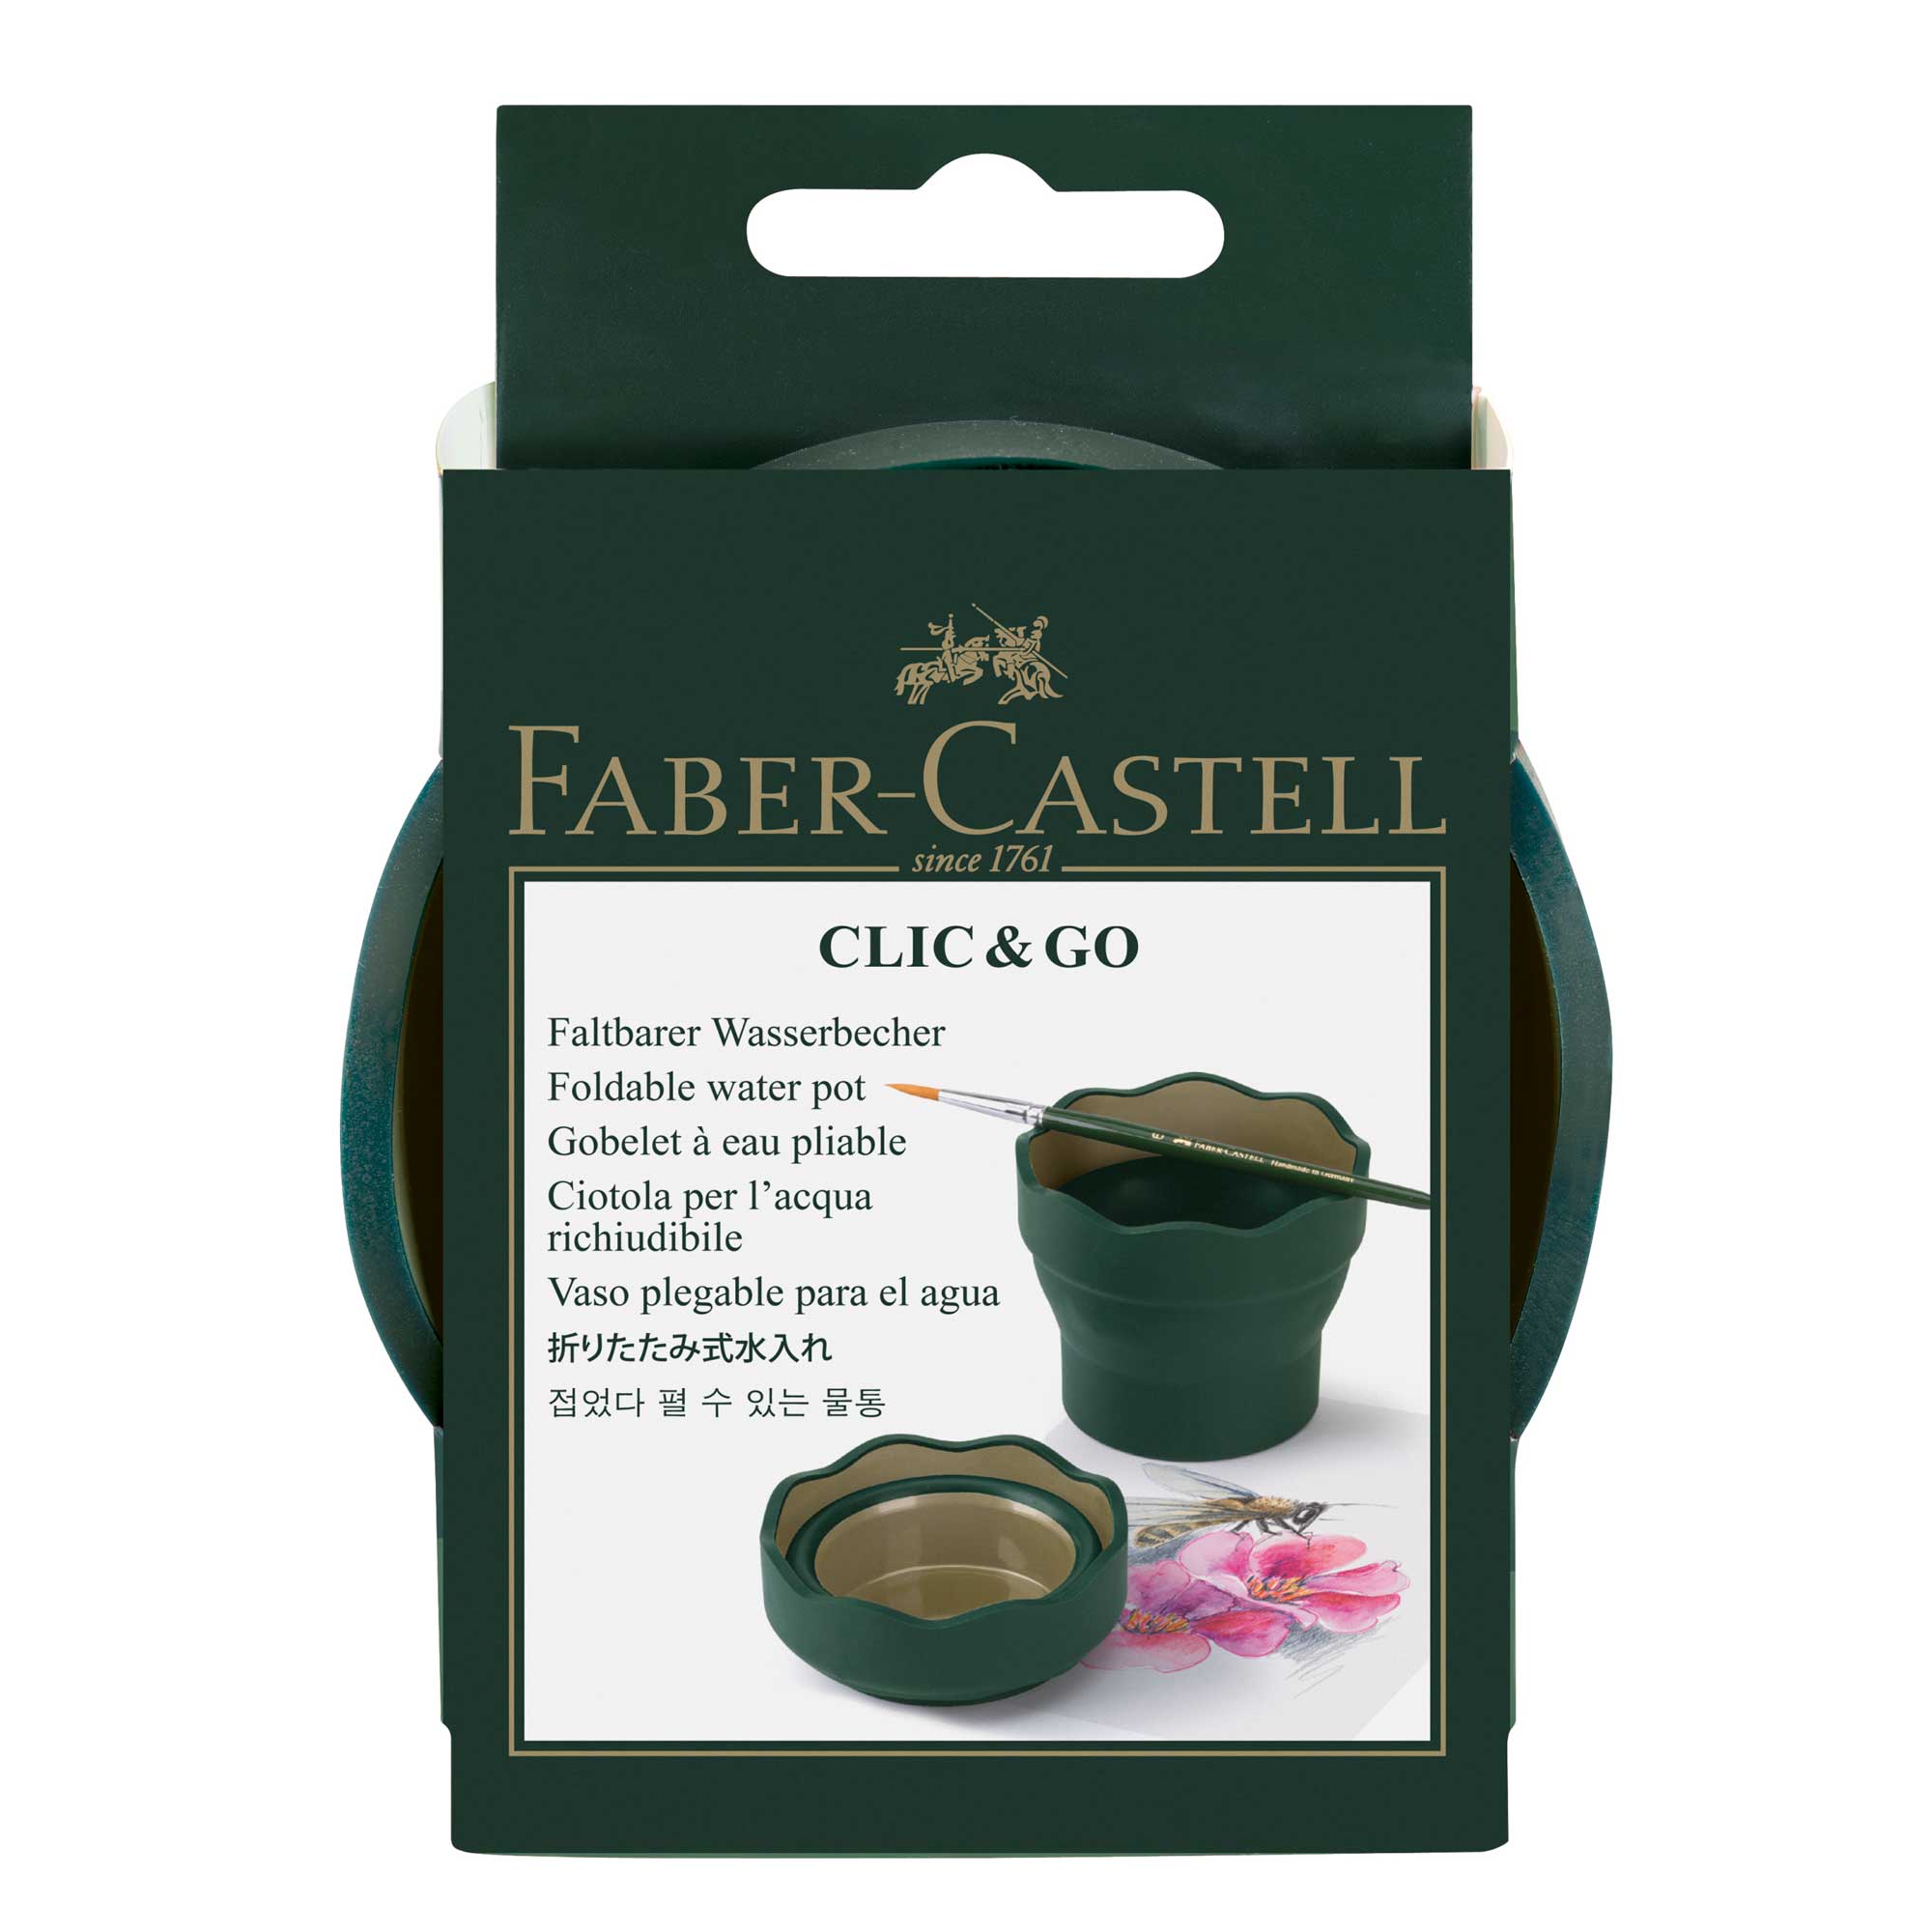 Faber-Castell Clic & Go Foldable Water Pot & Brush Holder in Packaging